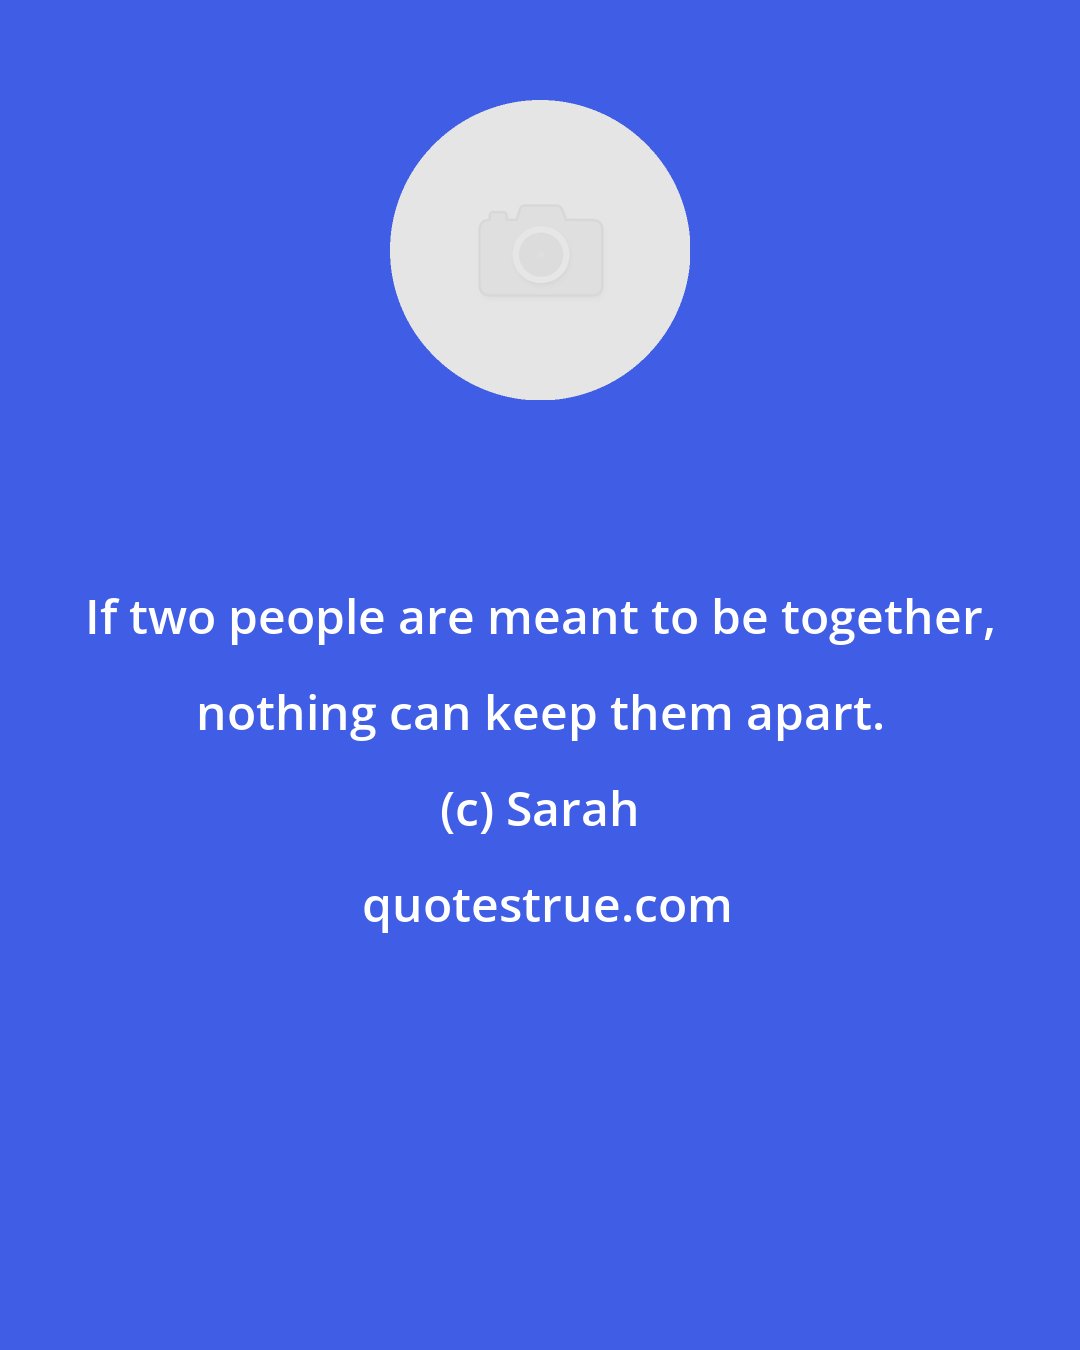 Sarah: If two people are meant to be together, nothing can keep them apart.